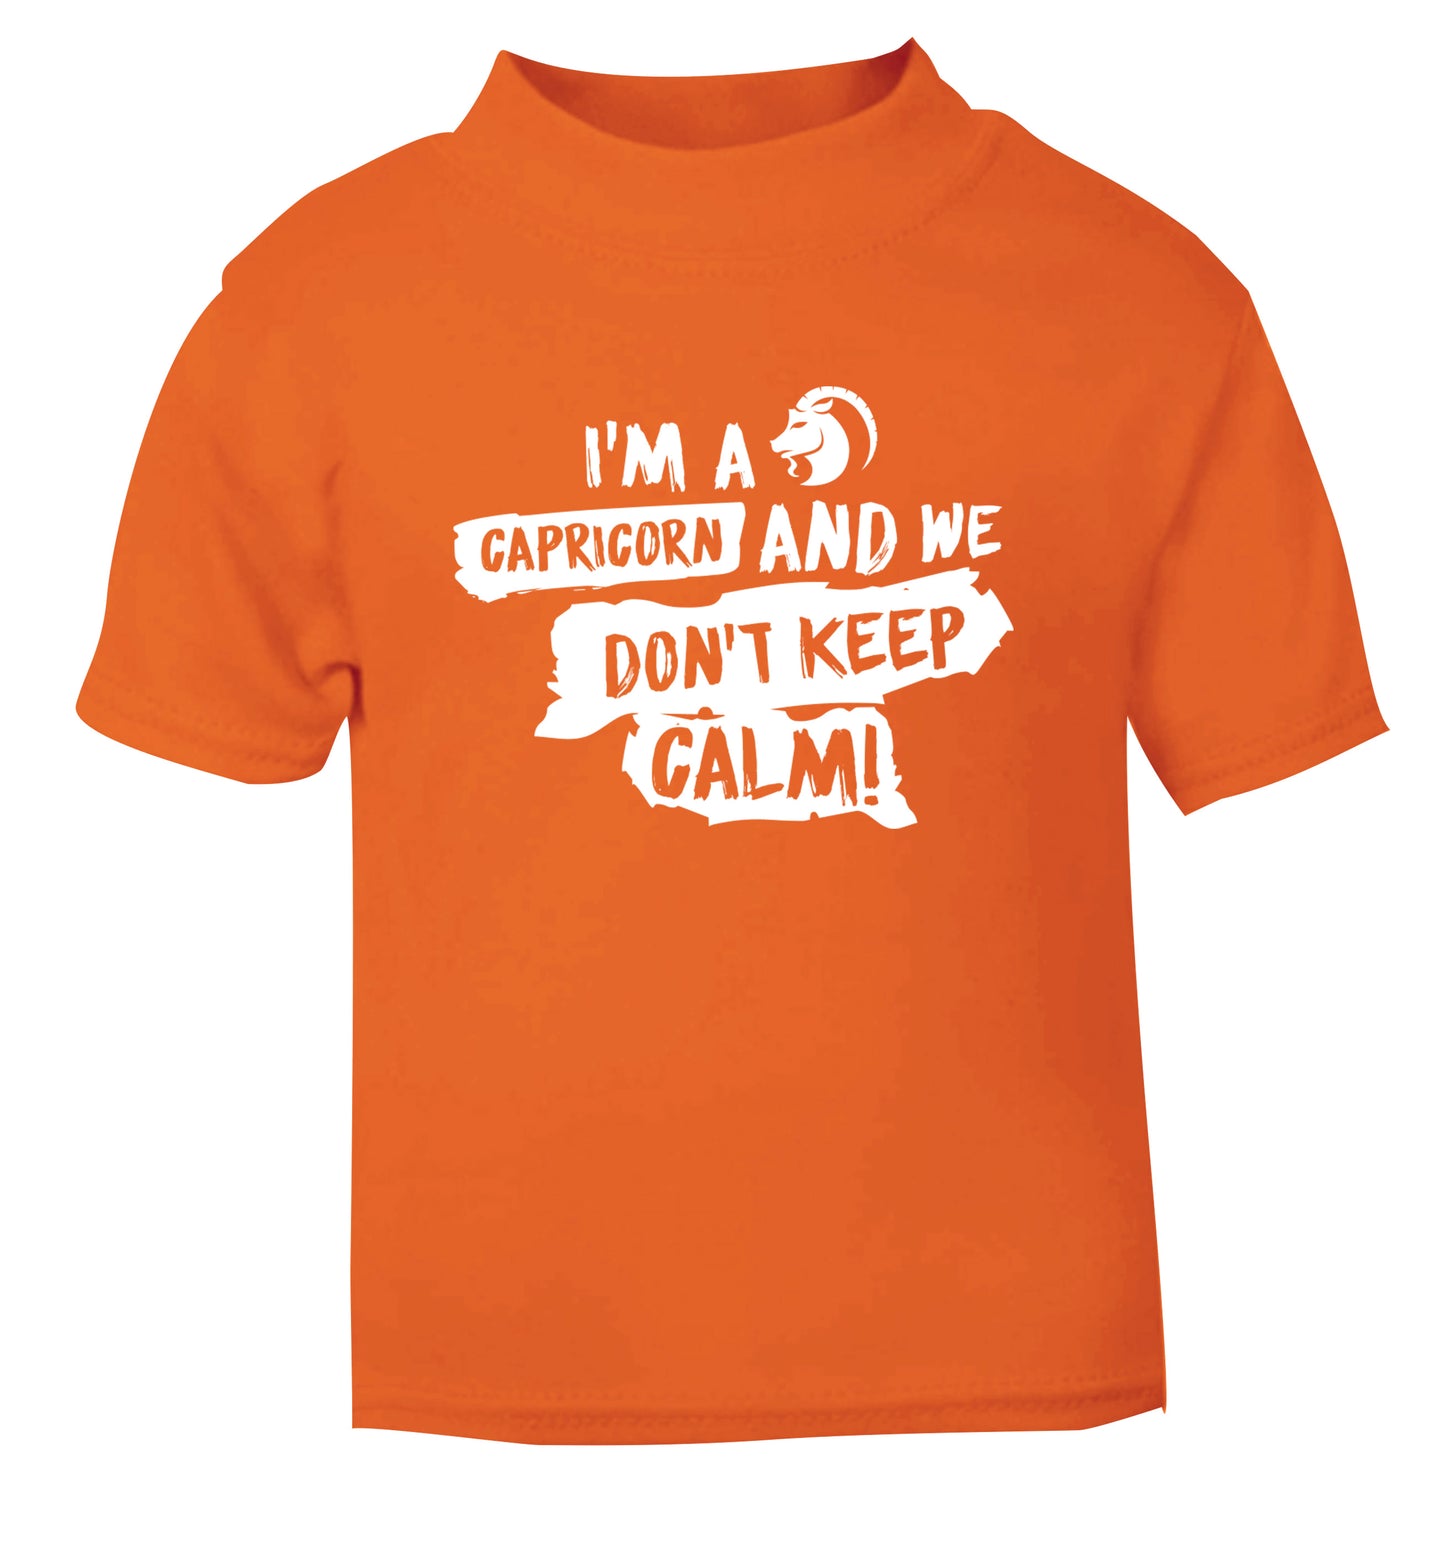 I'm a capricorn and we don't keep calm orange Baby Toddler Tshirt 2 Years